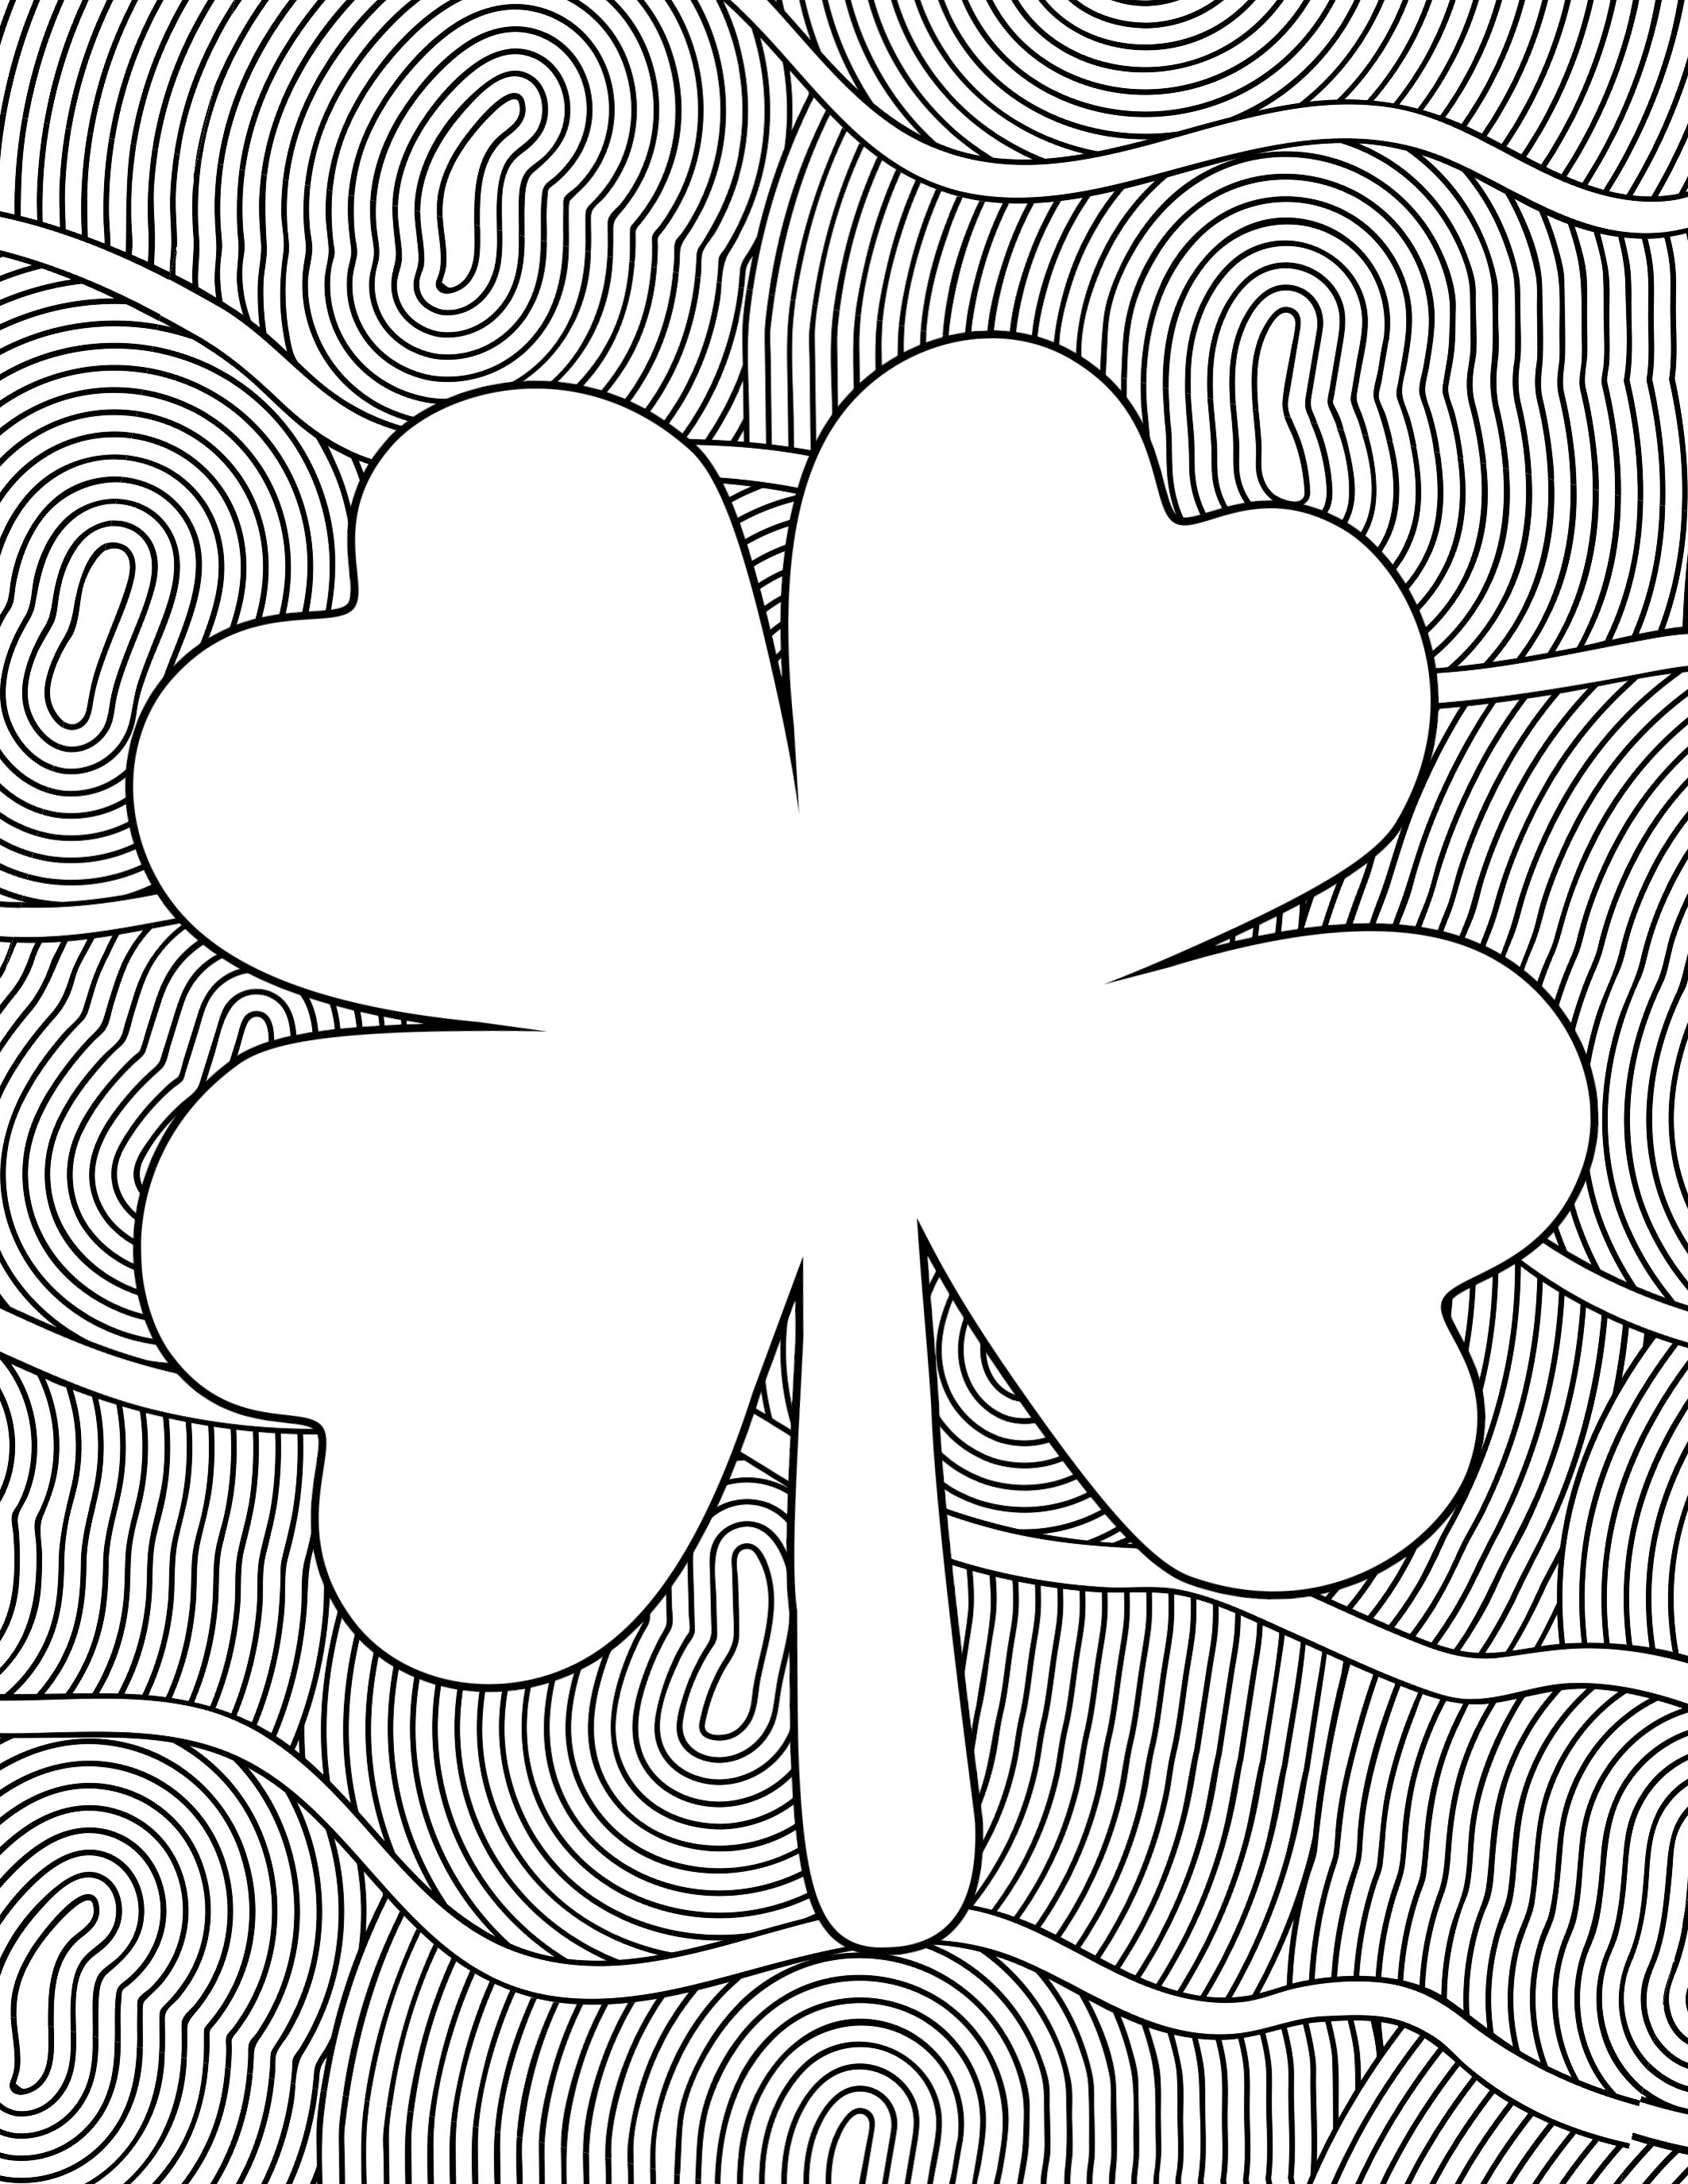 free-printable-st-patrick-s-day-coloring-sheets-paper-trail-design